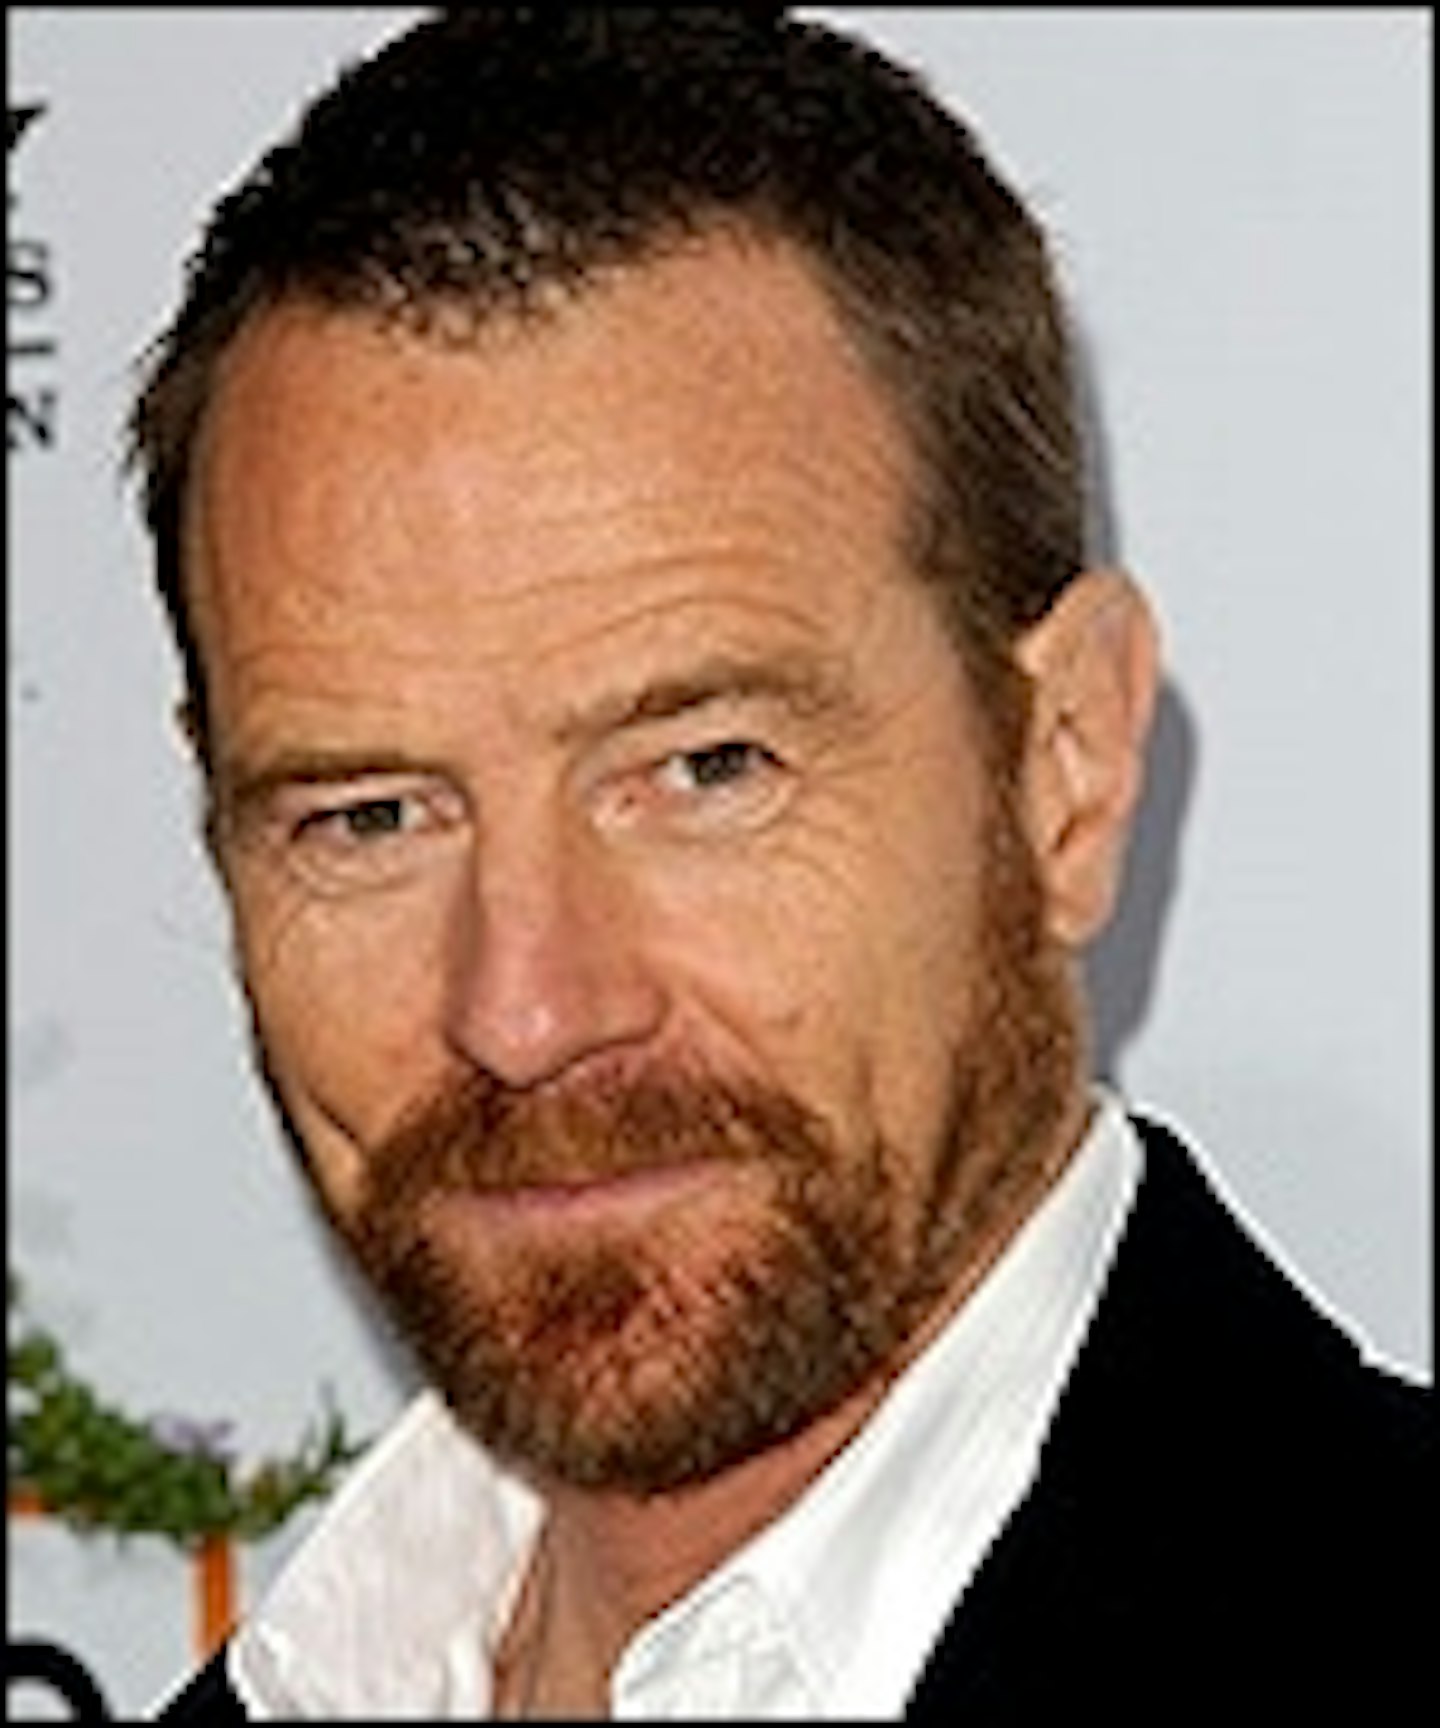 Bryan Cranston Aims To Direct Home Again